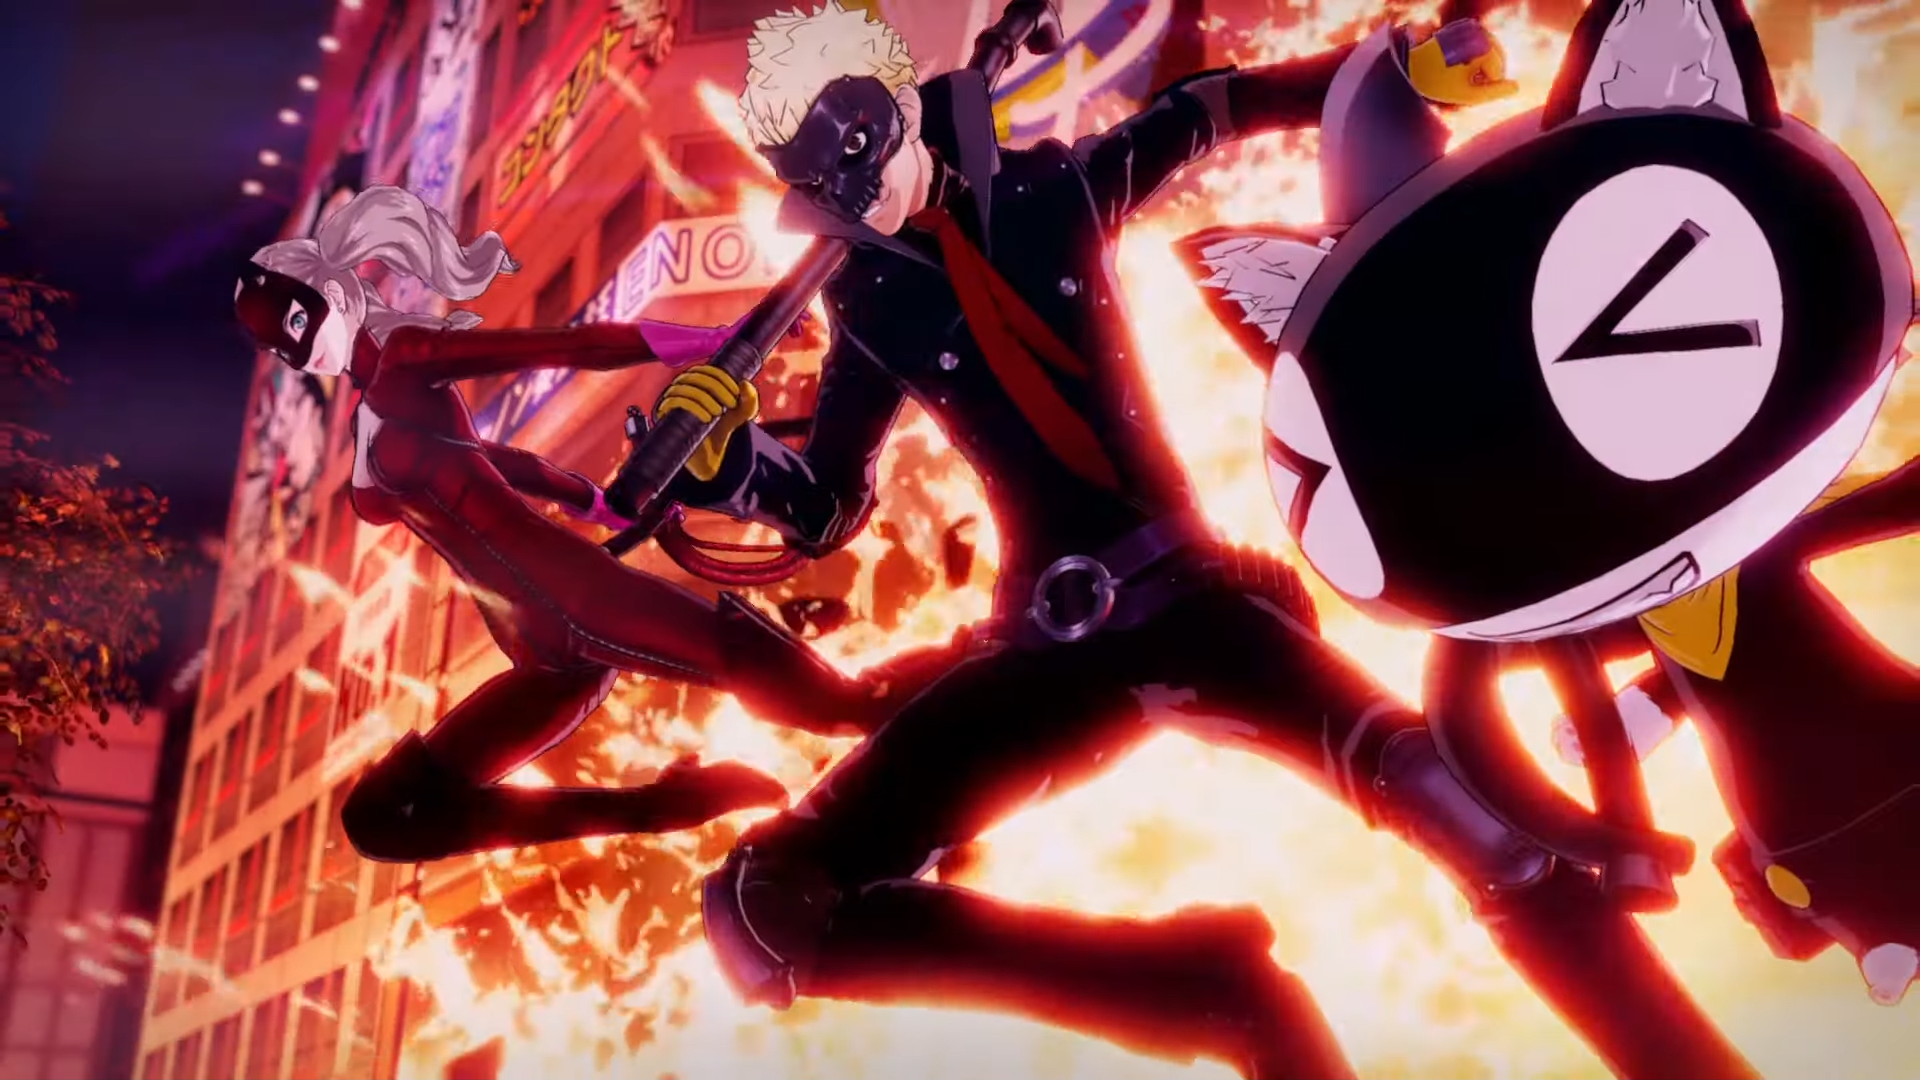 Ryuji, Ann, and Morgana blow through a building in Persona 5 Strikers